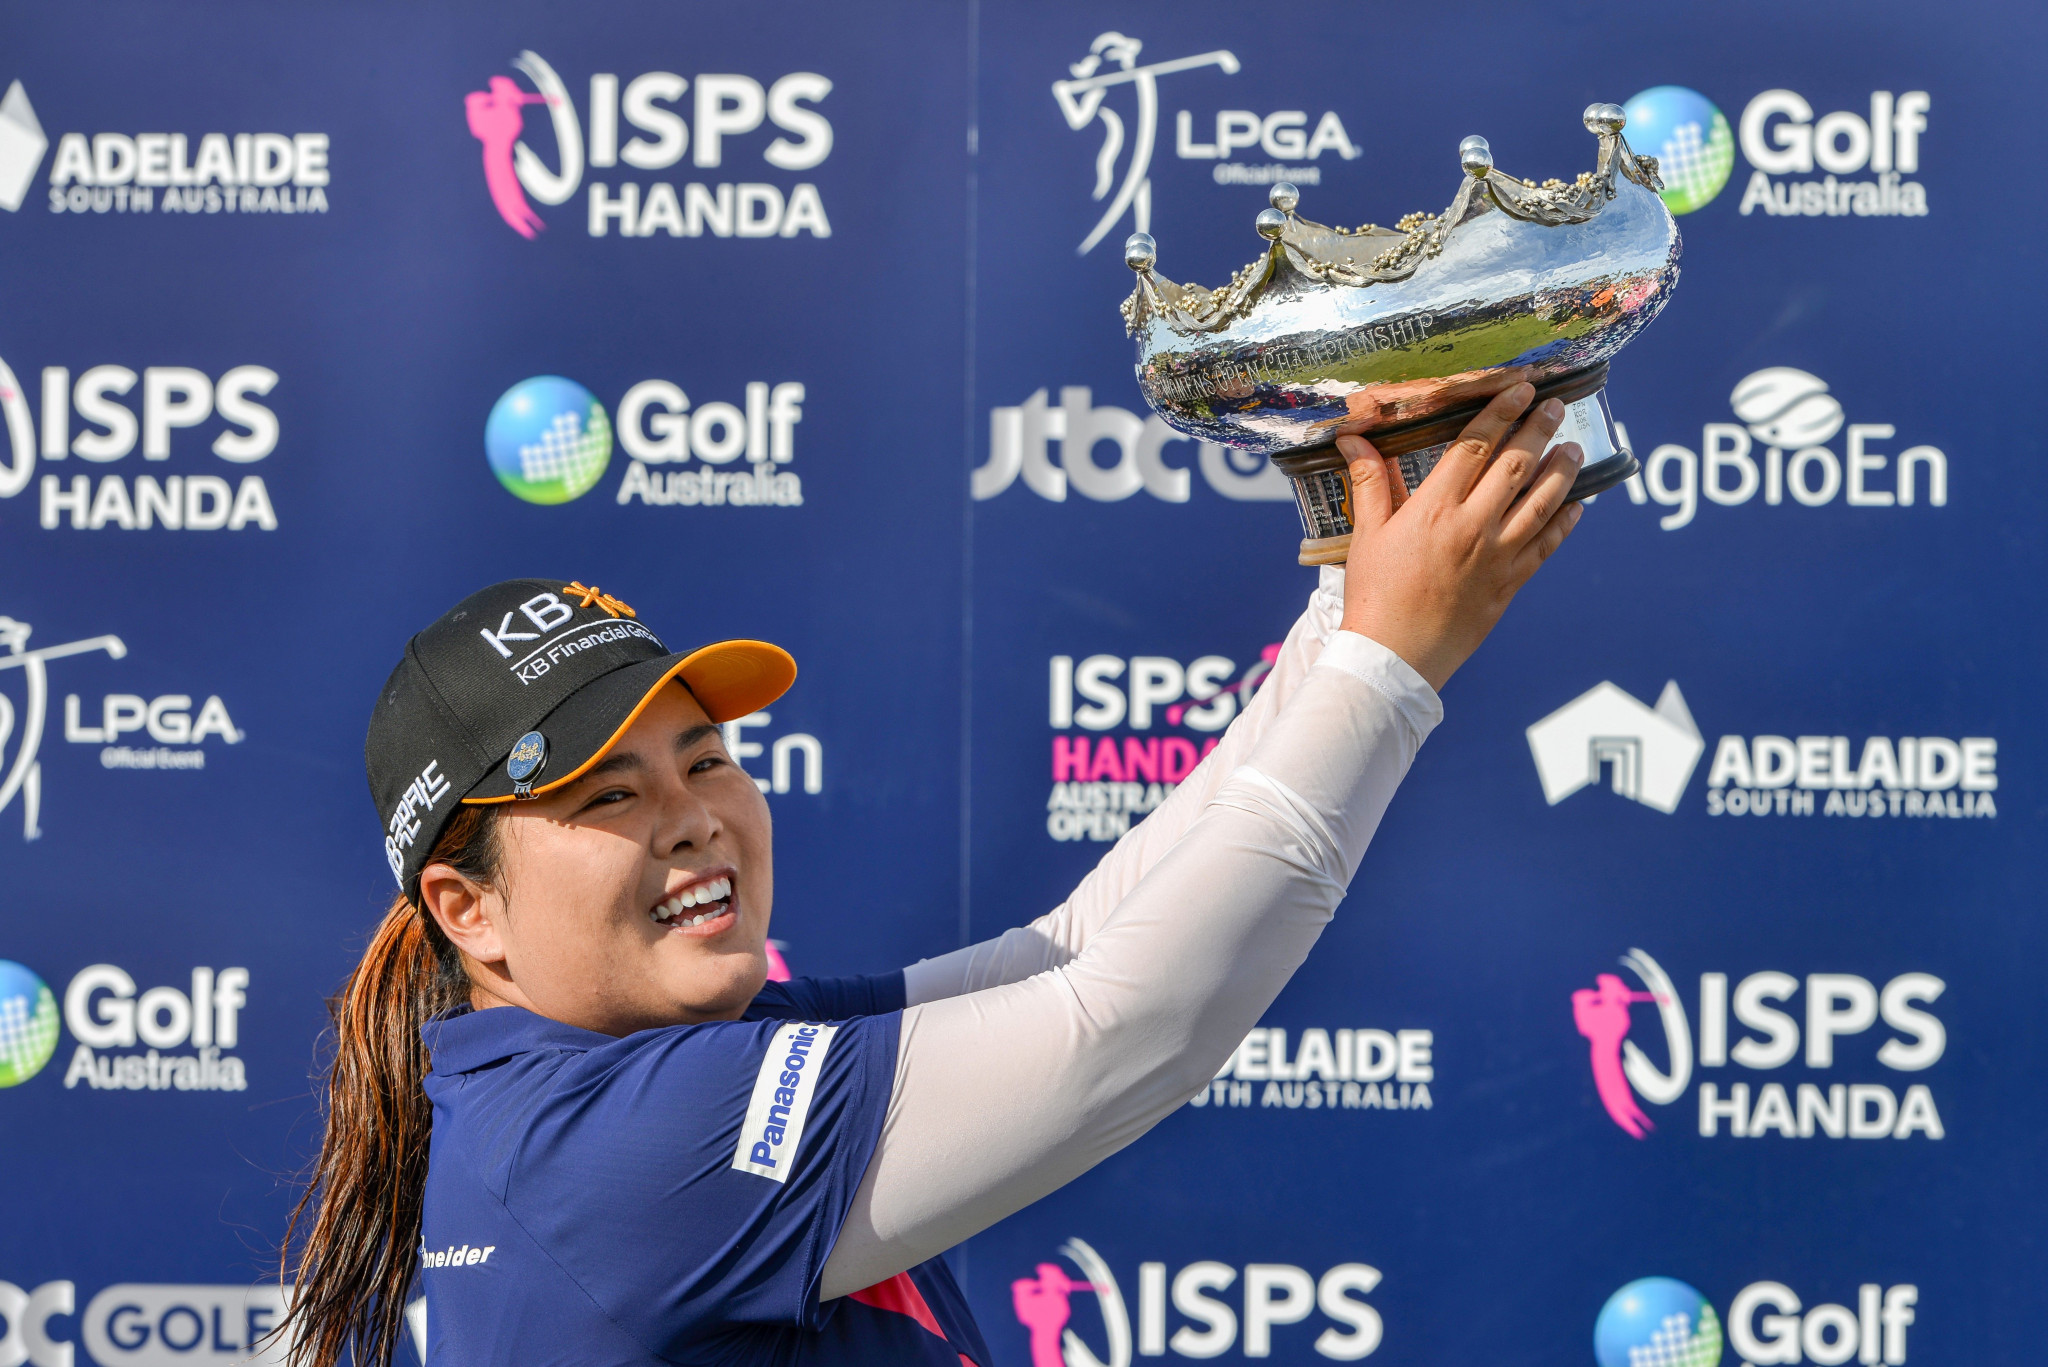 Park Inbee of South Korea was due to defend the women's Australian Open title in February next year only for it to be cancelled ©Getty Images